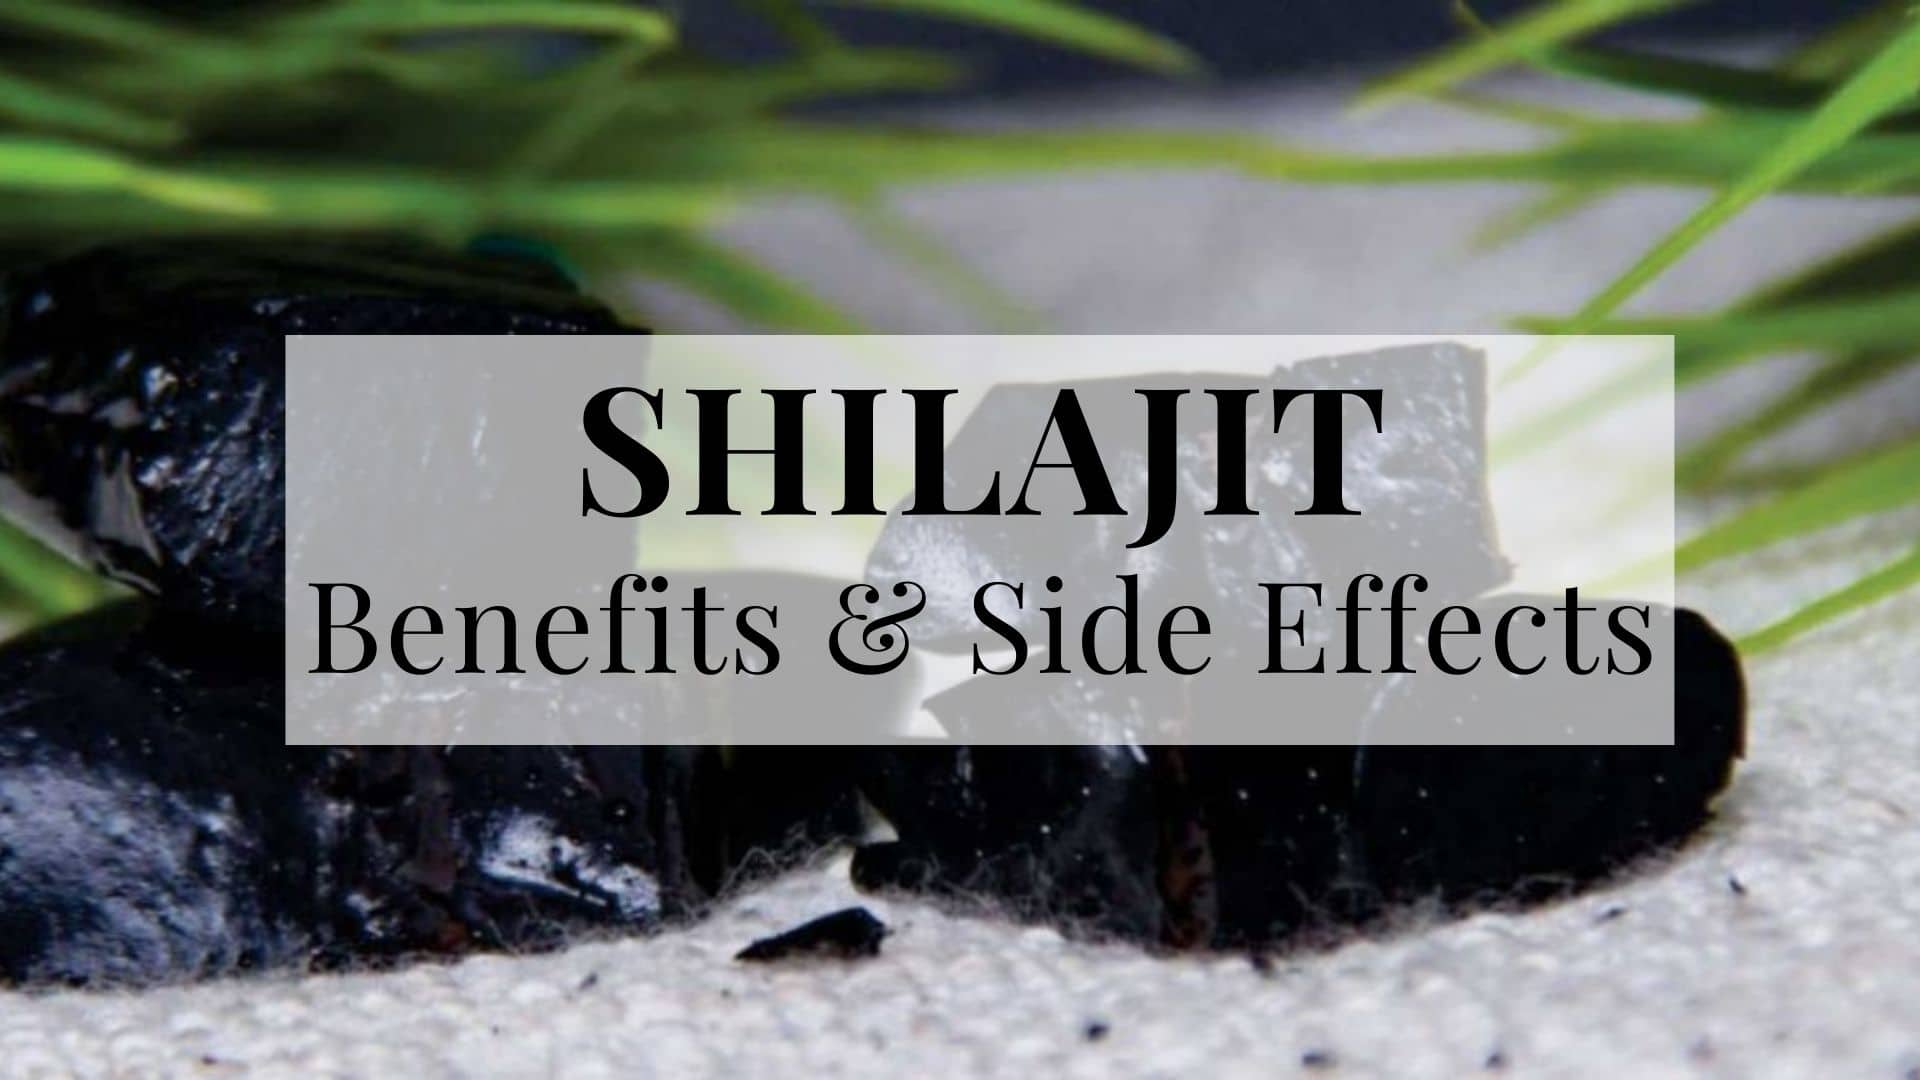 Shilajit: Health Benefits, Uses, Side Effects And More 